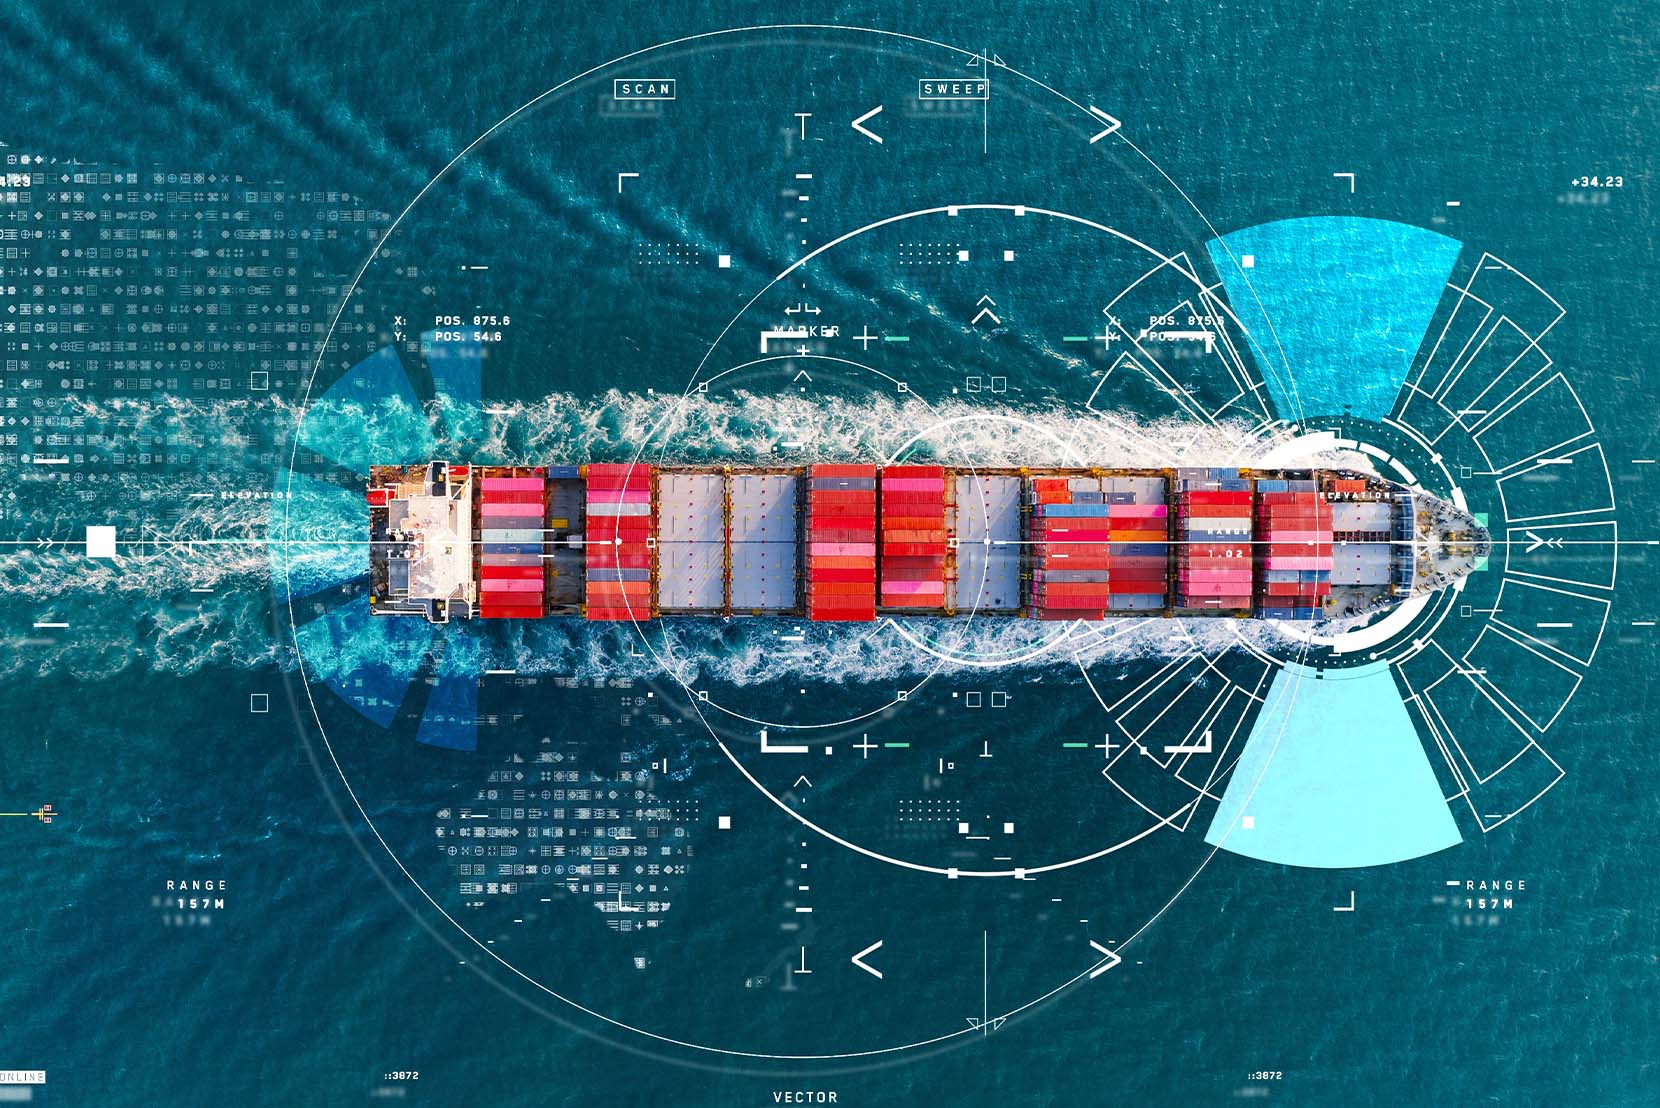 Digital Transformation in Global Shipping: A Value Stream Management Approach